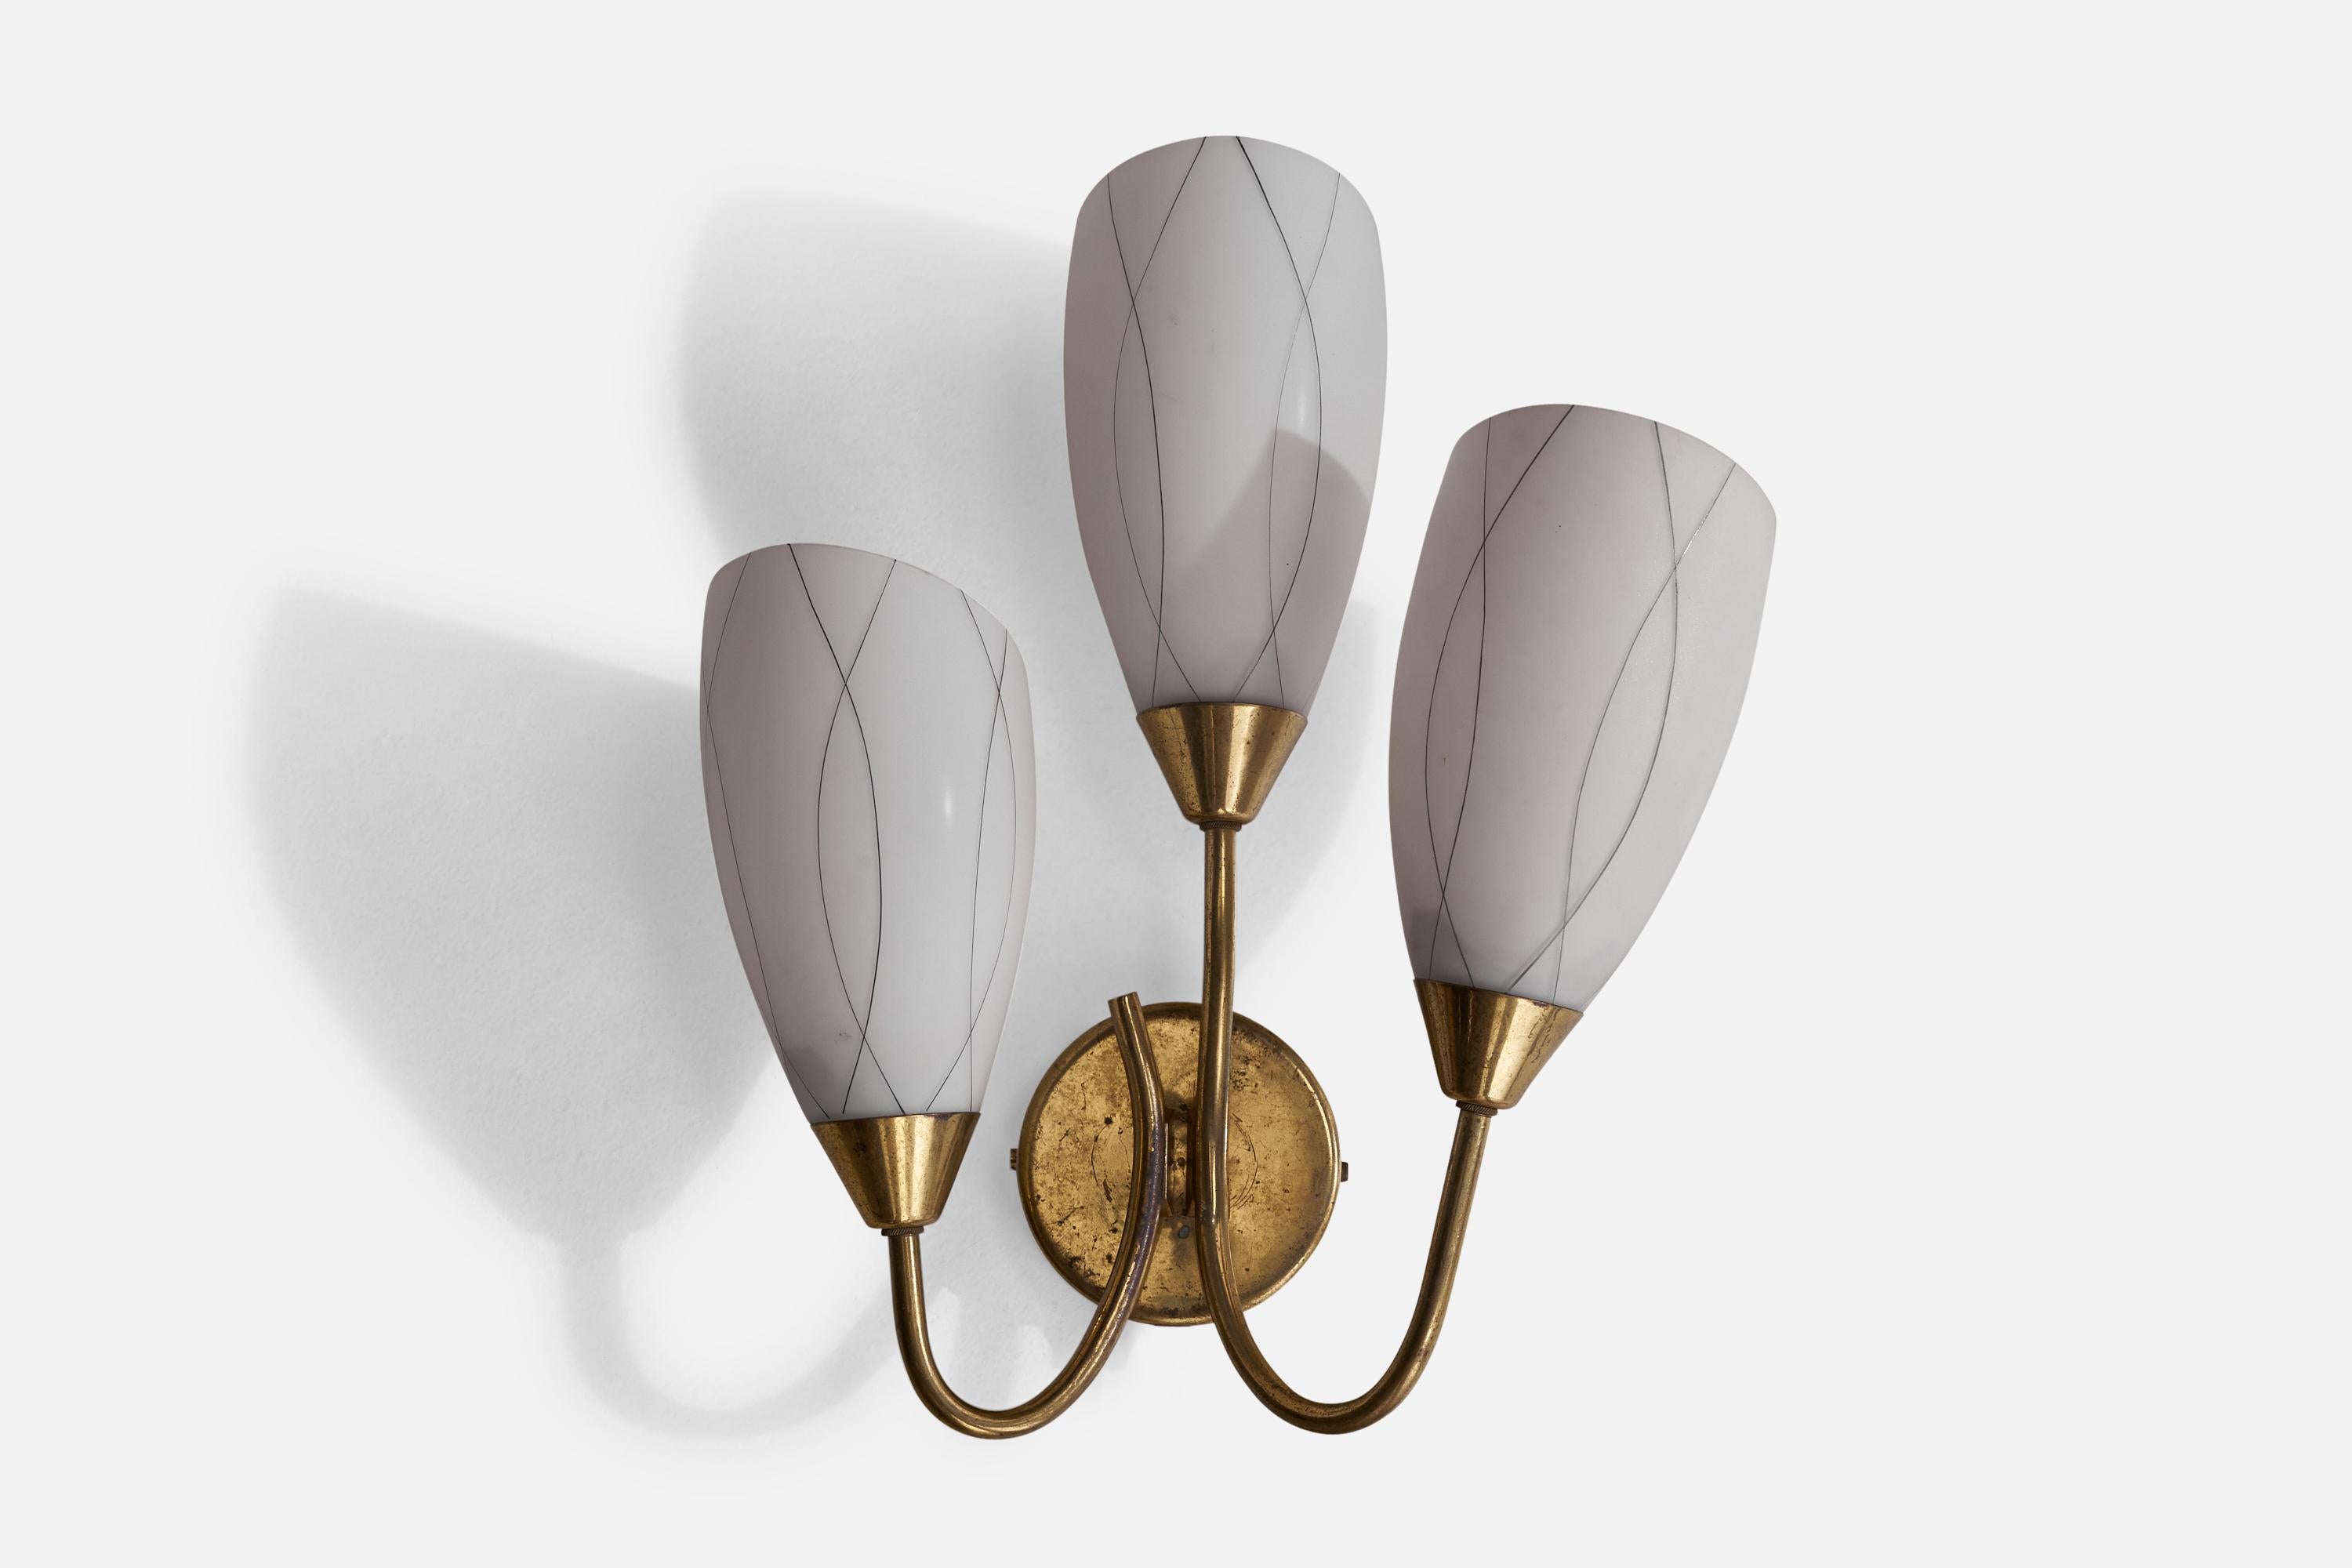 A three-armed brass and opaline glass wall light designed and produced by Itsu, Finland, 1940s.

Overall Dimensions (inches): 15.75” H x 12.50” W x 6”  D
Back Plate Dimensions (inches): 4”H x 4”  W x 1”  D
Bulb Specifications: E-14 Bulb
Number of